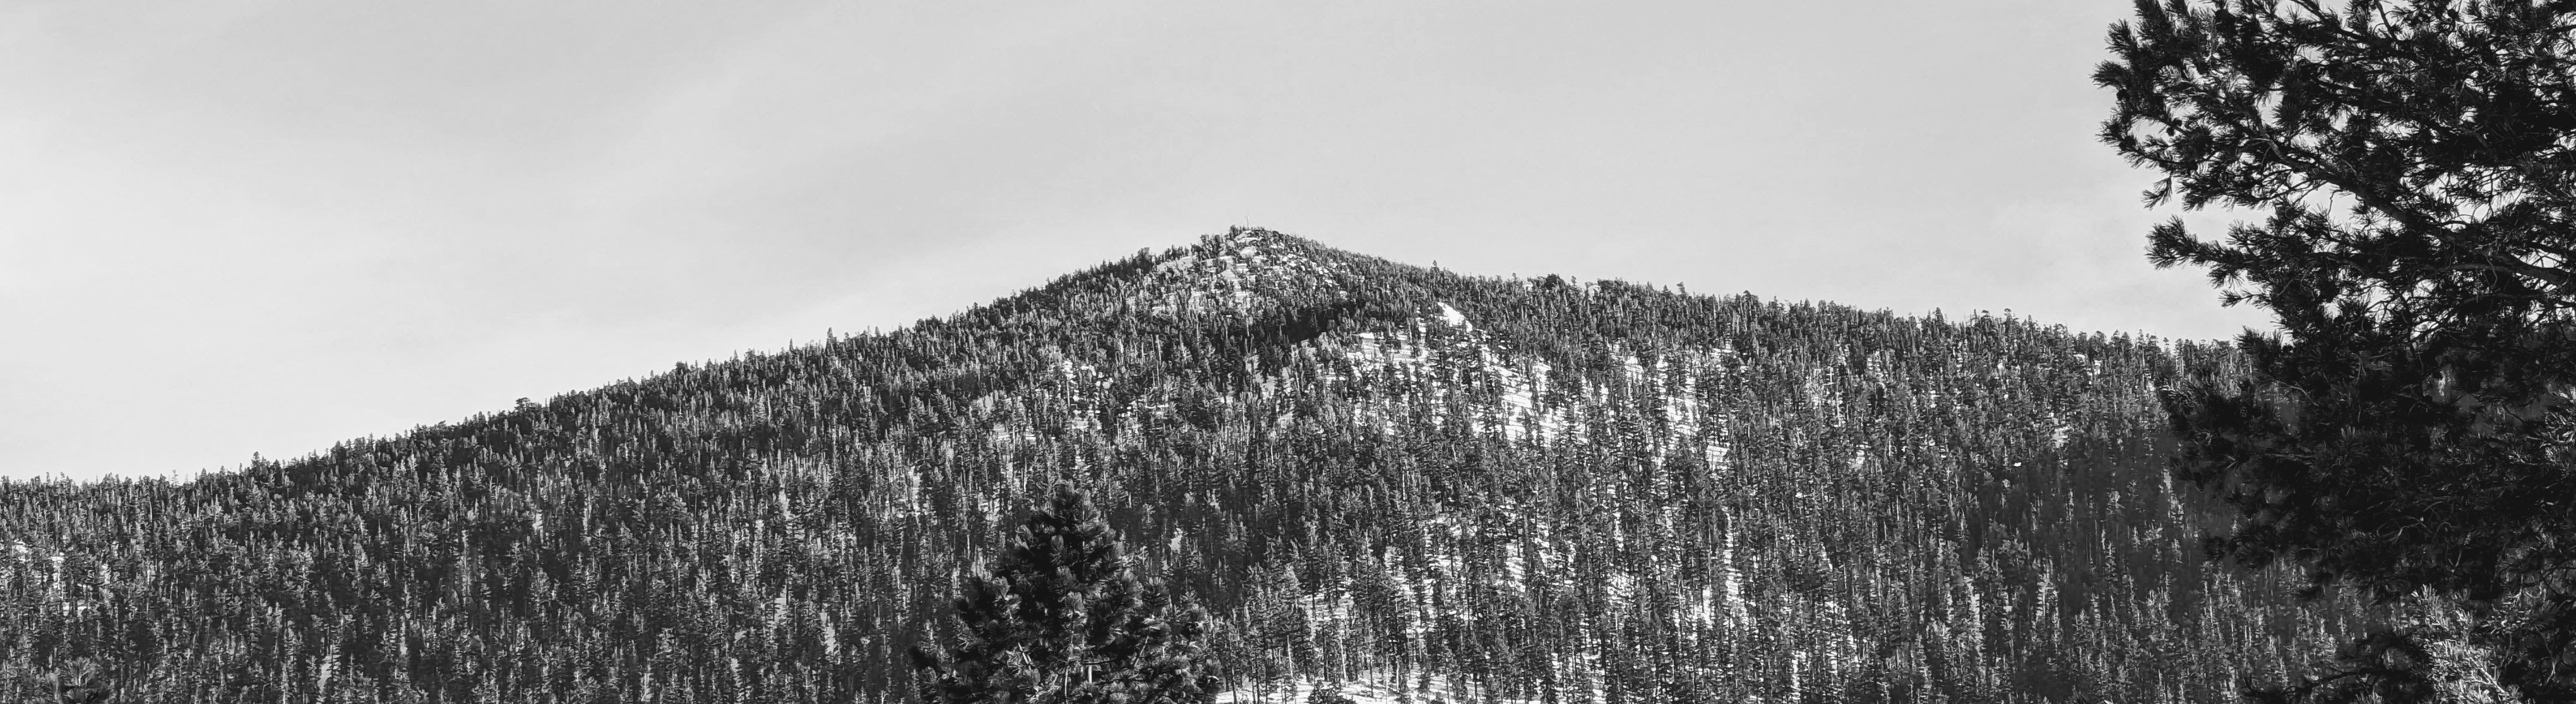 Banner containing a black and white photograph of a mountain covered in trees with snow on the ground. The mountain is in the background and takes up most of the image. The sky is visible above the mountain and is mostly cloudy. The trees on the mountain are coniferous and densely packed. The foreground consists of a few trees on the right side of the image.